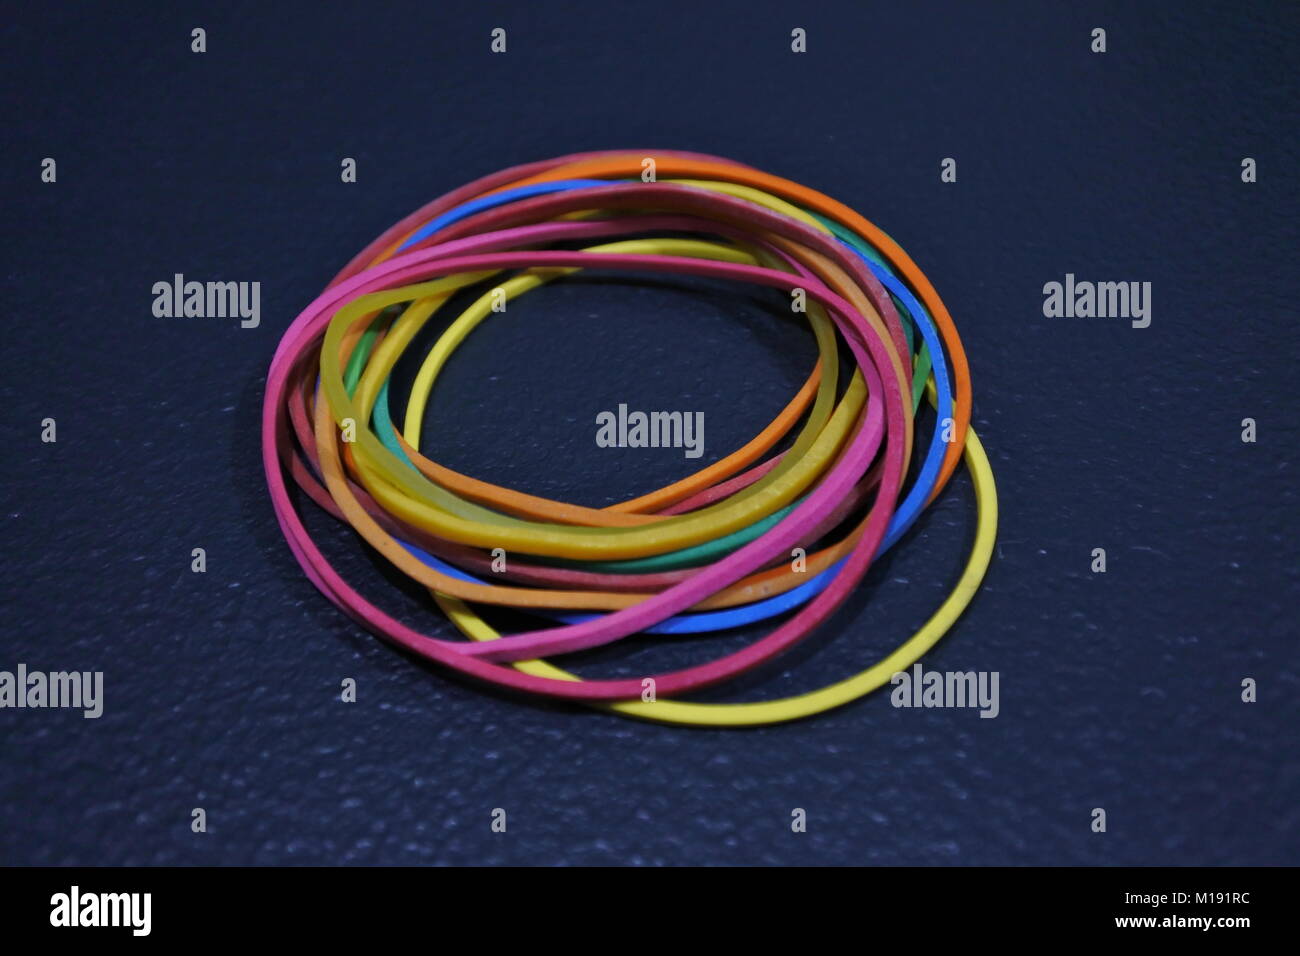 A collection of rubber bands with different colors. Stock Photo